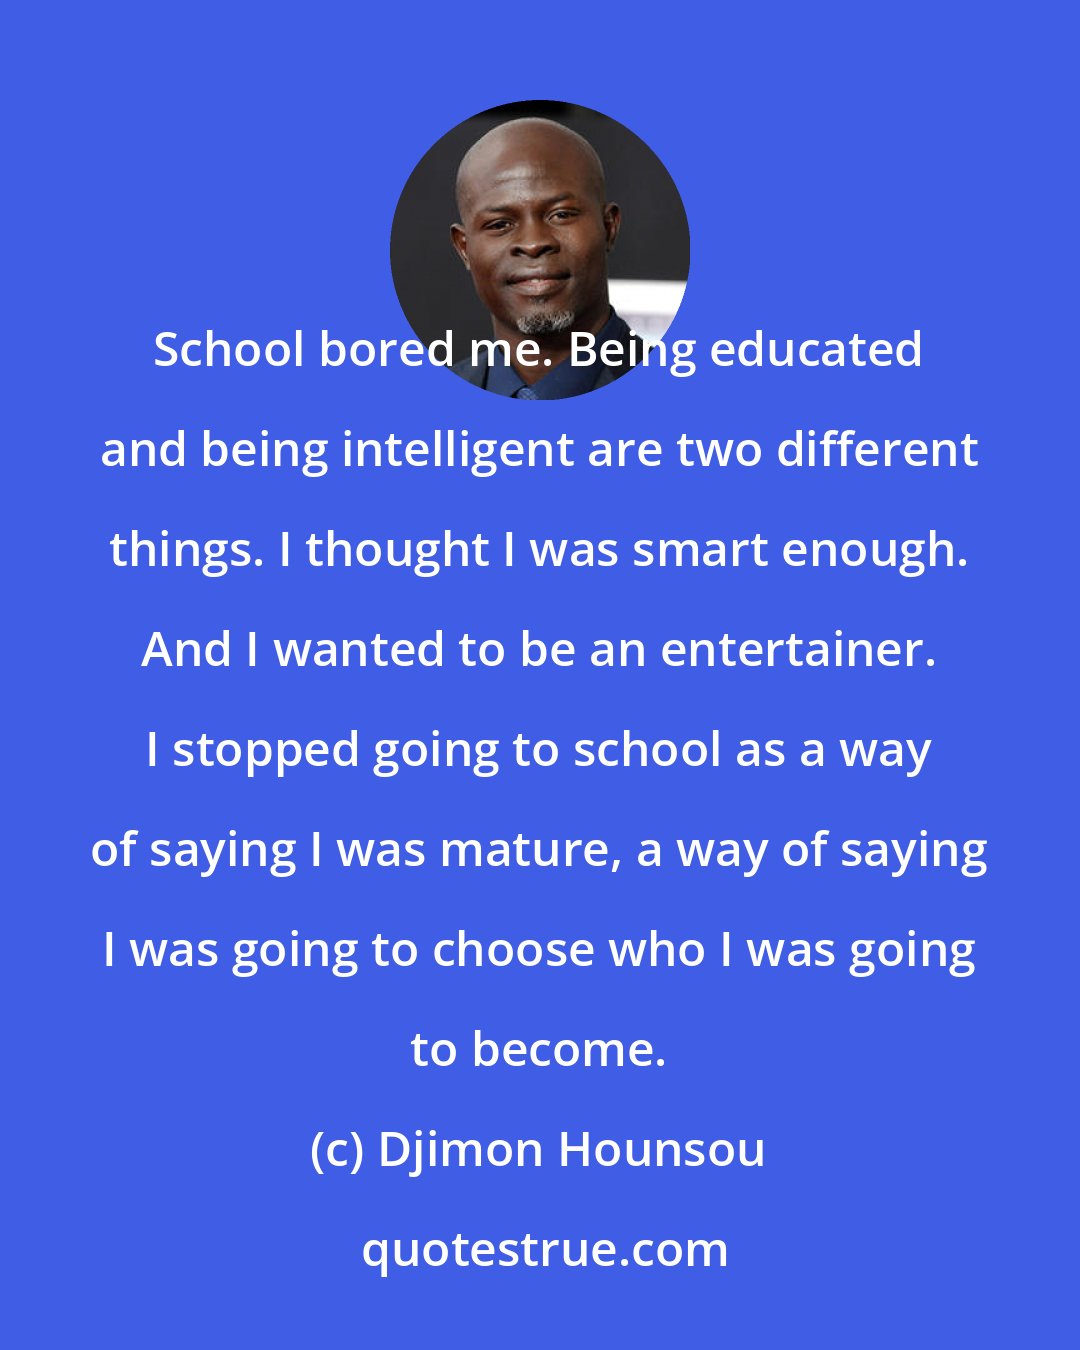 Djimon Hounsou: School bored me. Being educated and being intelligent are two different things. I thought I was smart enough. And I wanted to be an entertainer. I stopped going to school as a way of saying I was mature, a way of saying I was going to choose who I was going to become.